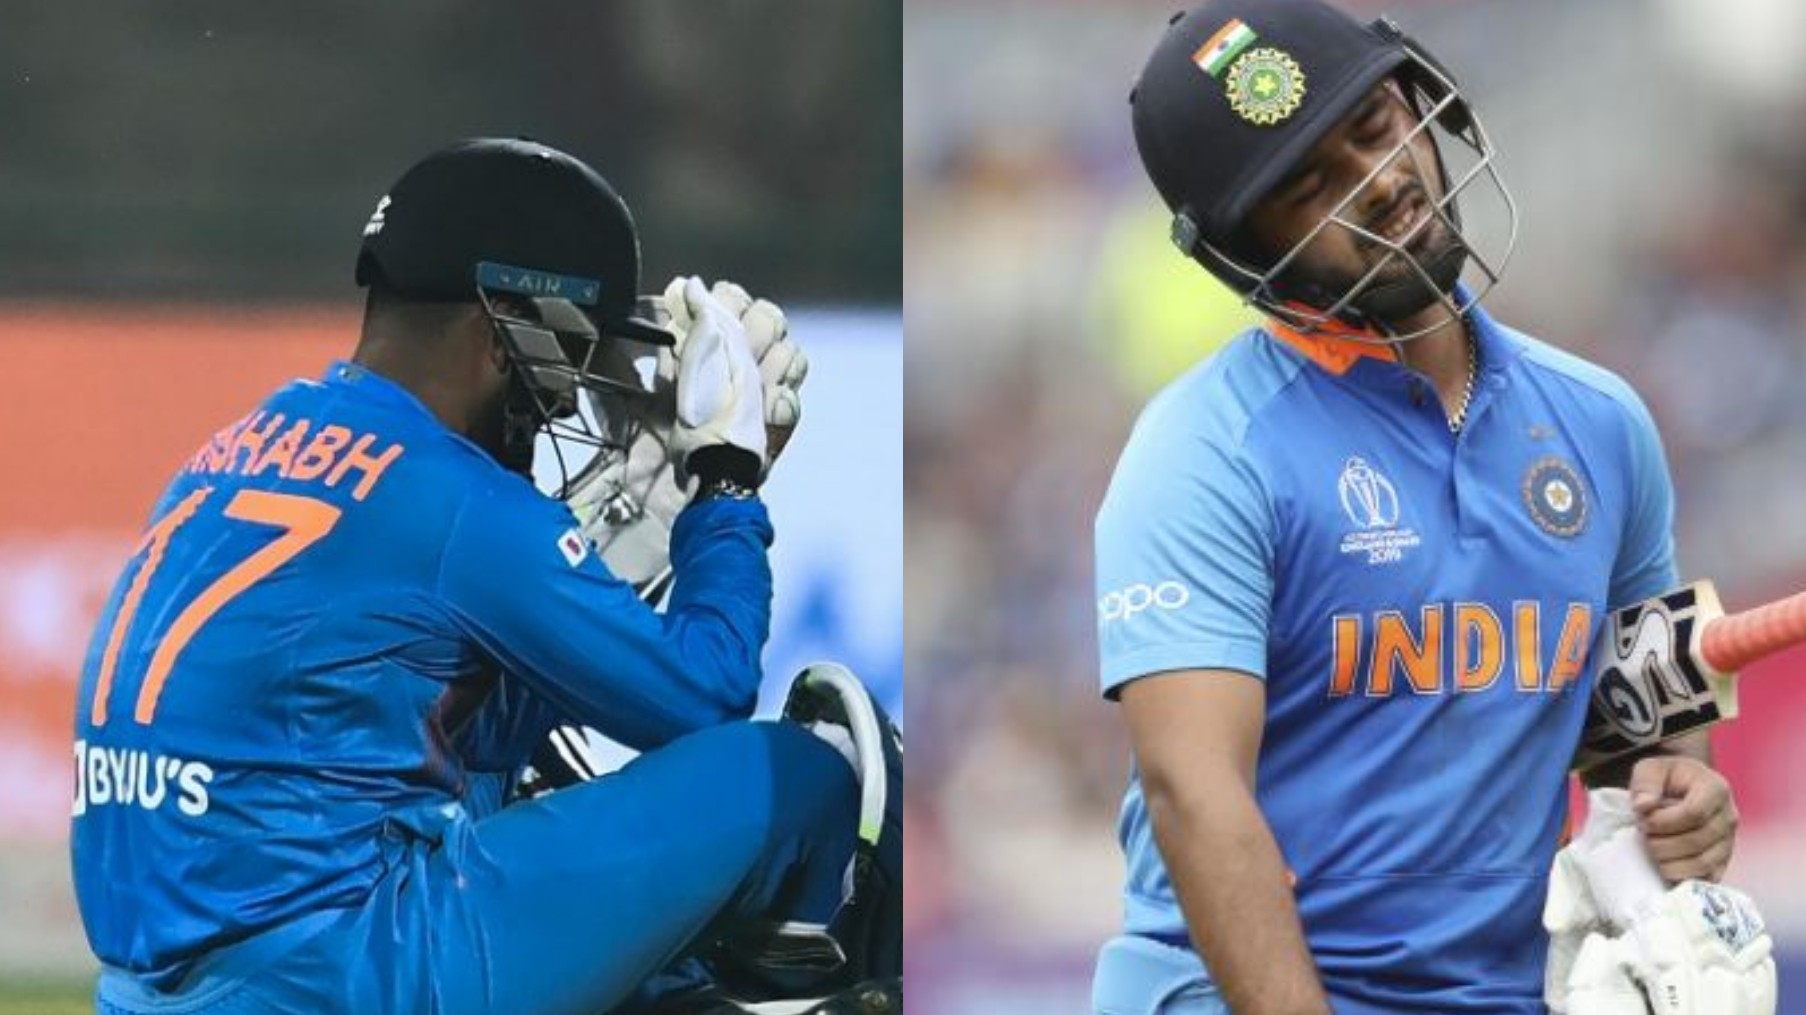 AUS v IND 2020-21: Fans react after BCCI drops Rishabh Pant from India’s ODI, T20I squad for Australia tour